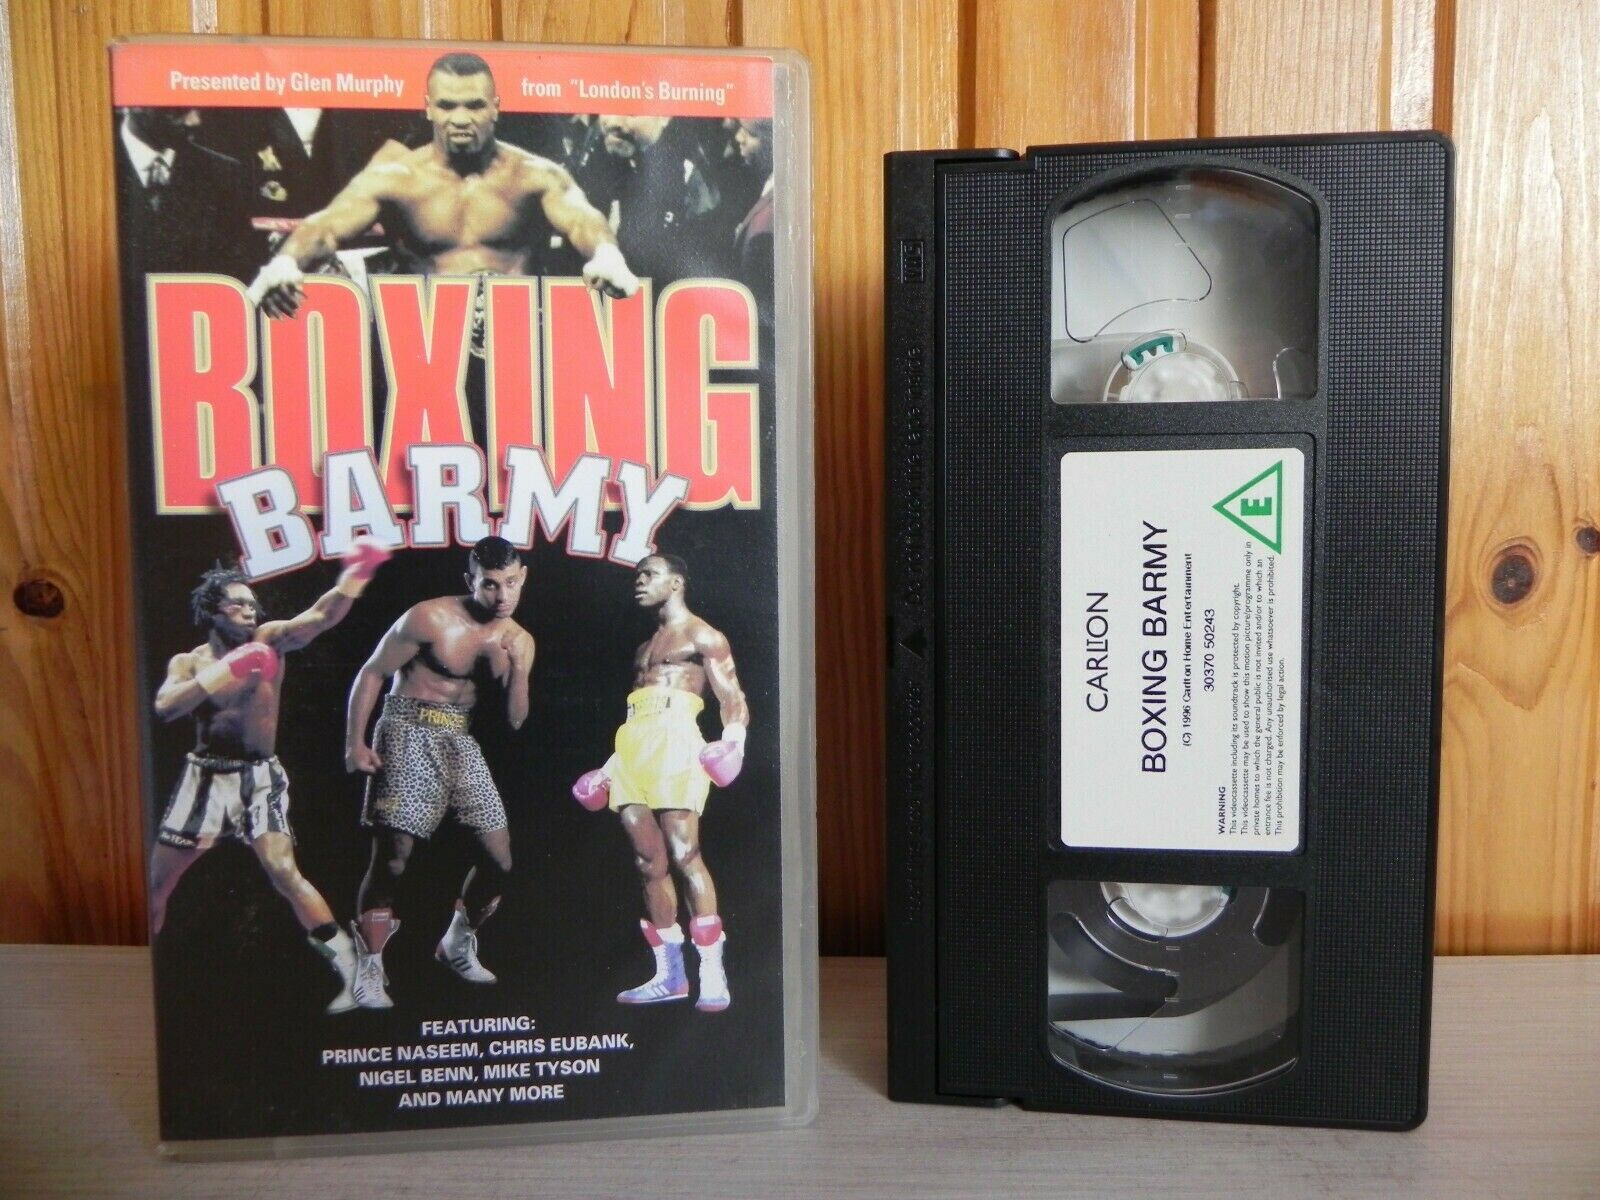 Boxing Barmy - Incredible Knock Outs - Mike Tyson - Prince Naseem - Pal VHS-